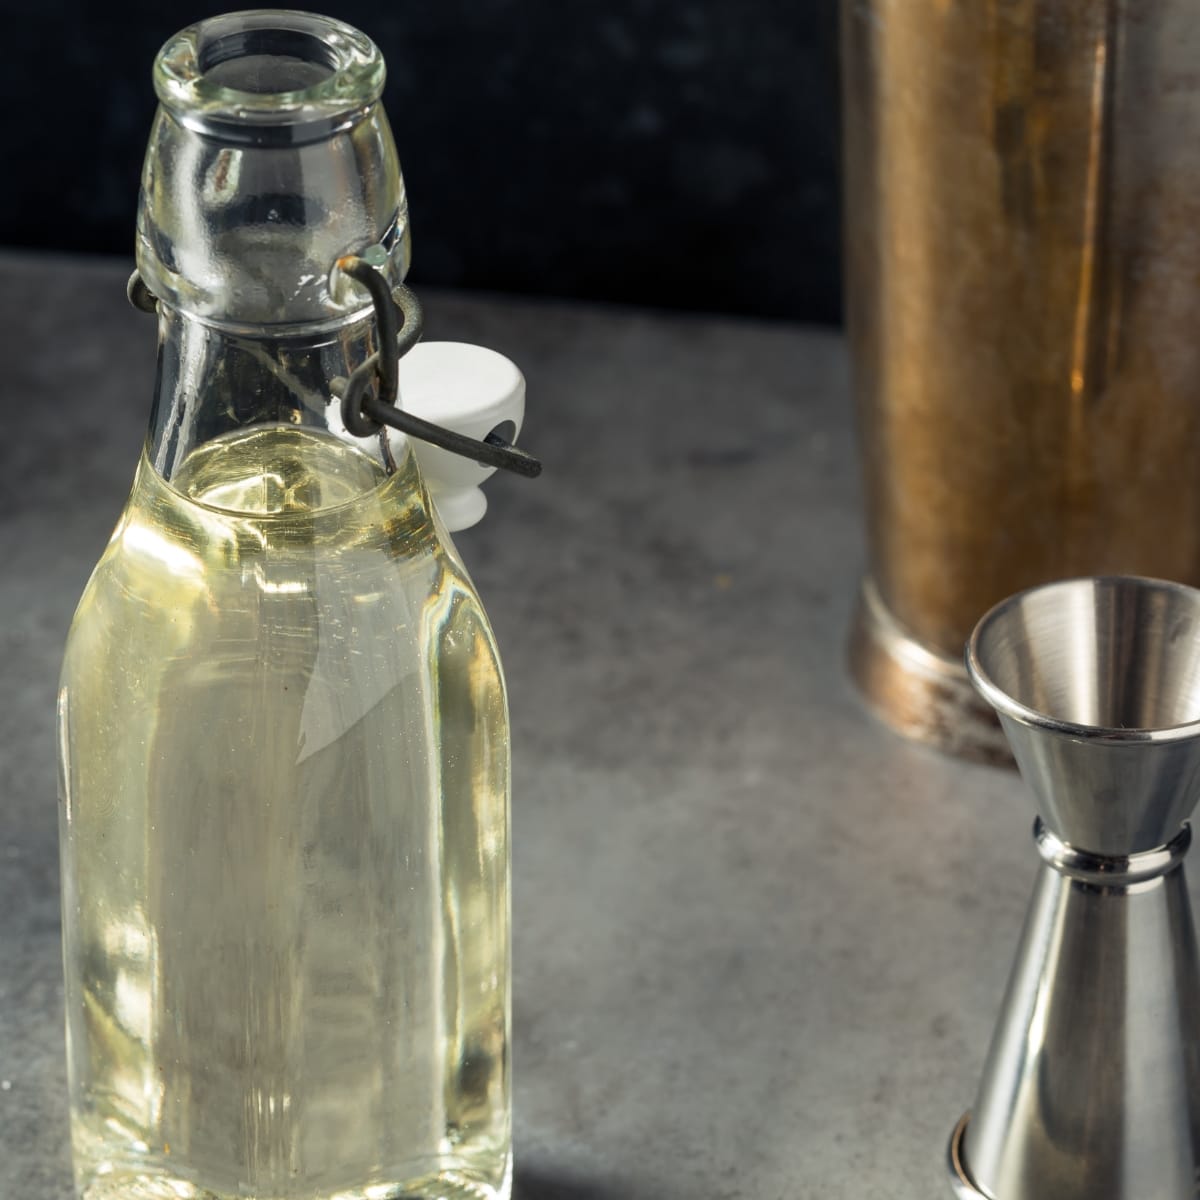 A glass bottle filled with simple syrup beside a jigger and shaker on a concrete table.